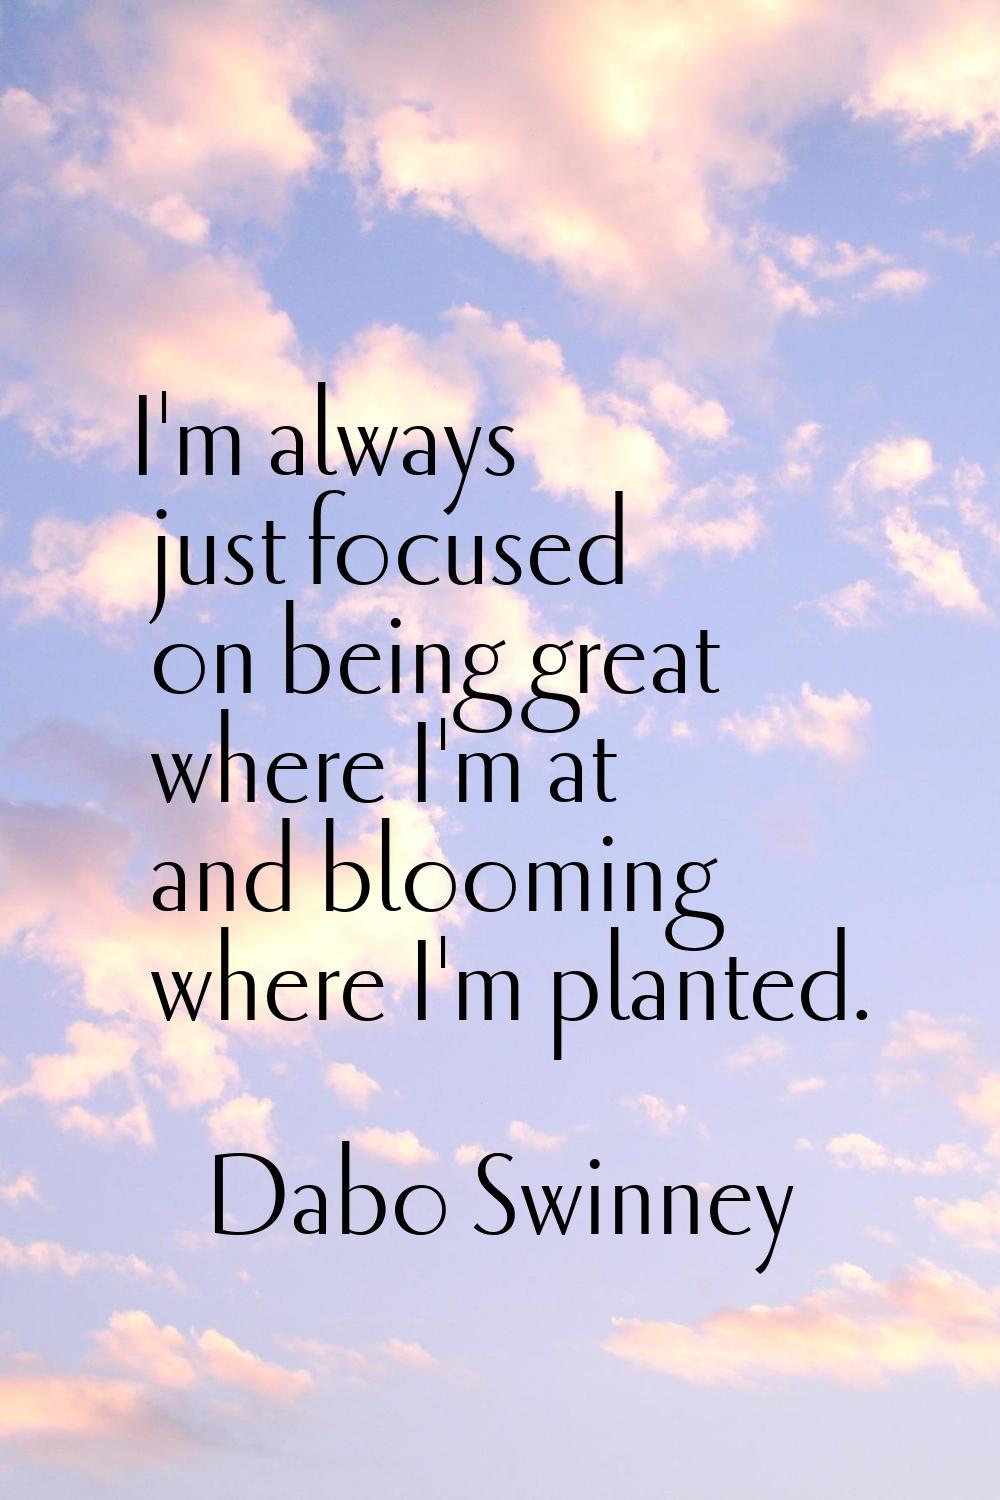 I'm always just focused on being great where I'm at and blooming where I'm planted.